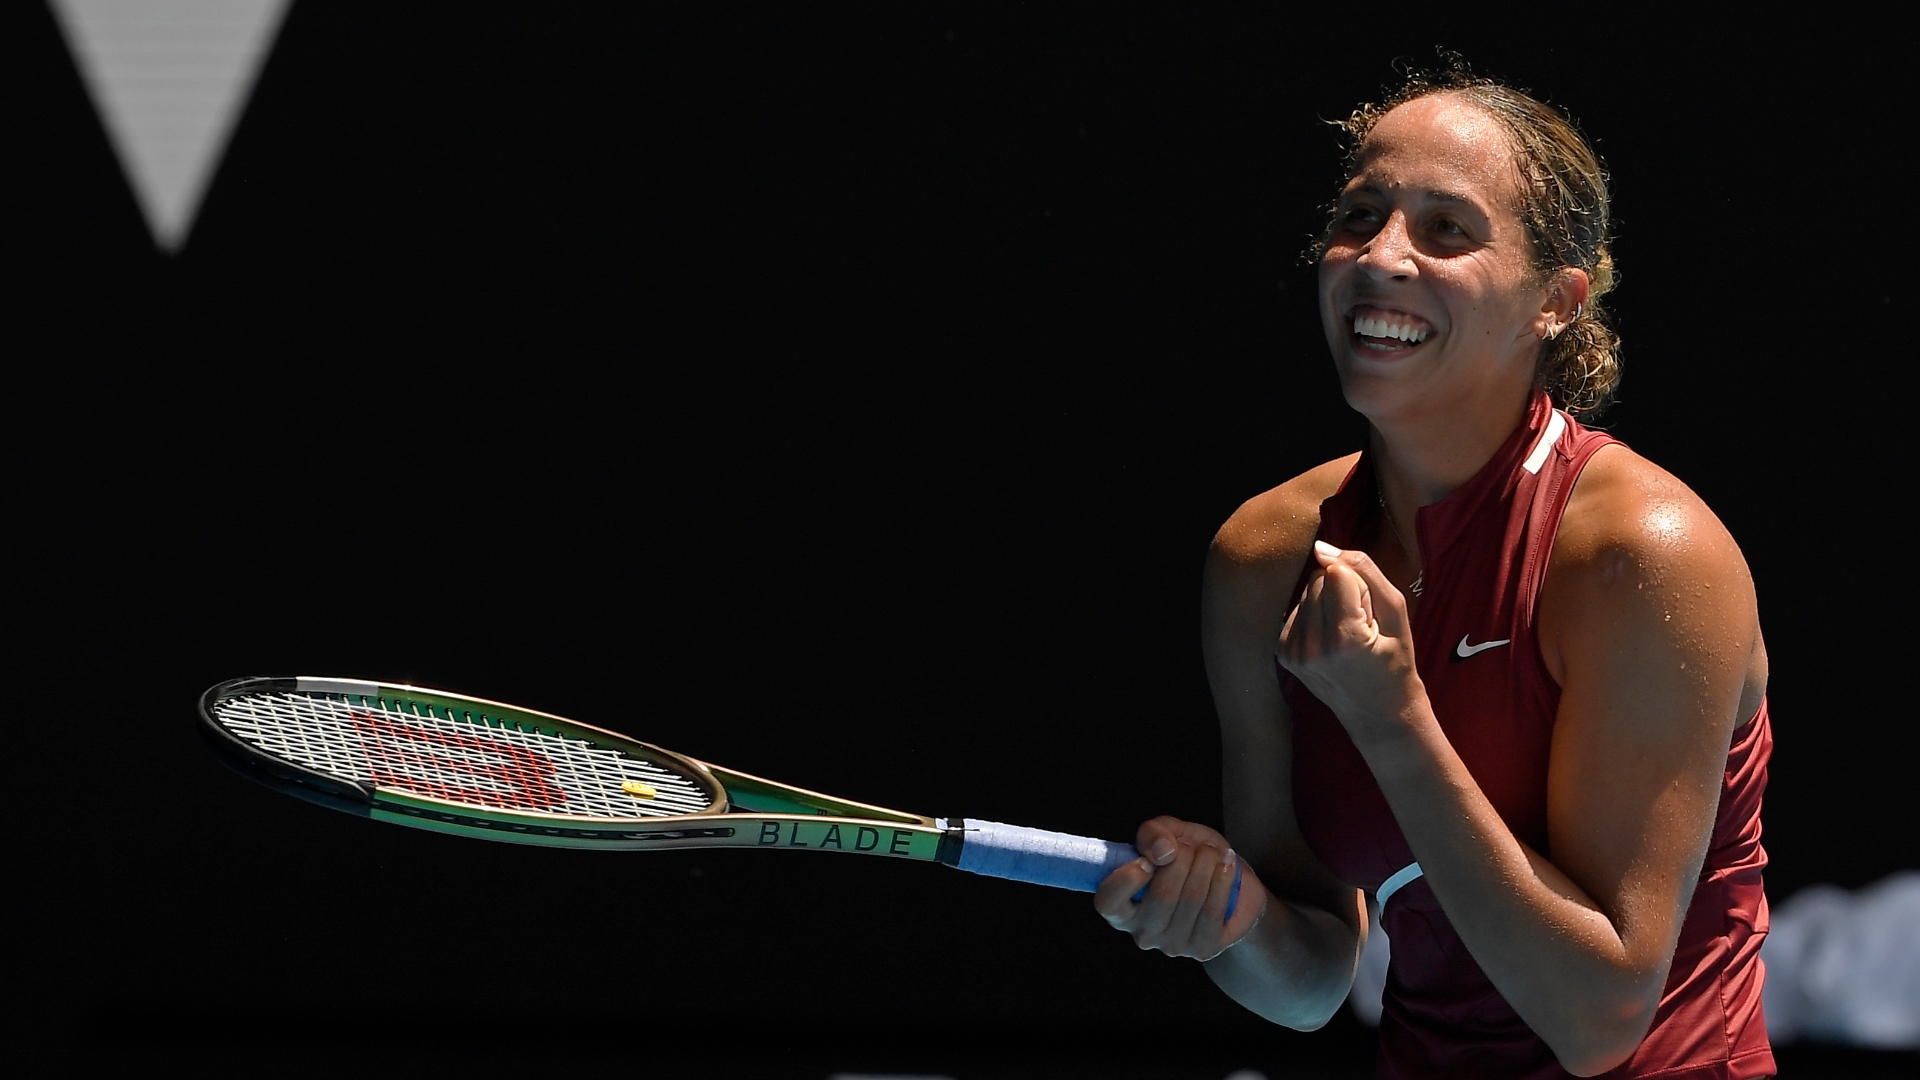 Madison Keys advances to the Australian Open semifinal after straight sets win